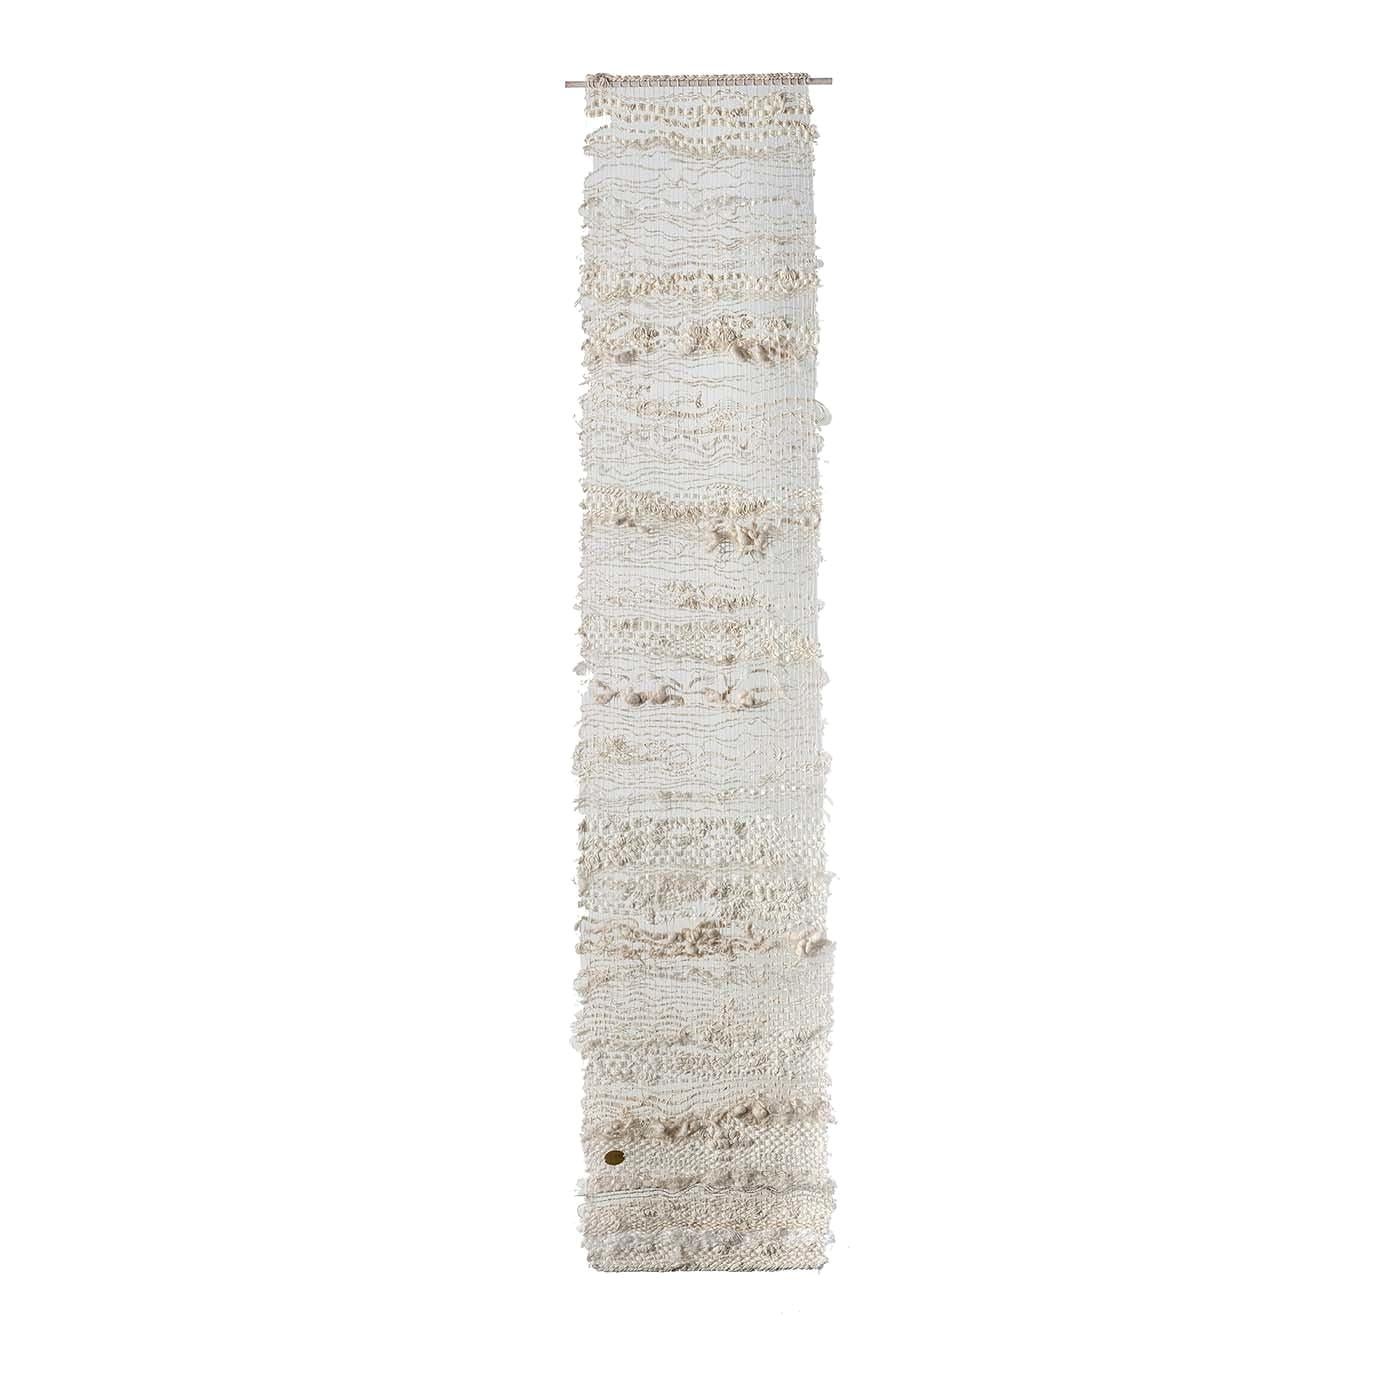 This fascinating handwoven vertical tapestry uses traditional techniques in a composition of linen, hemp, silk, shantung silk, wool and cotton. Seeking to represent a dialogue on The Home, the tapestry is best hung at a distance of 7 - 10 cm from